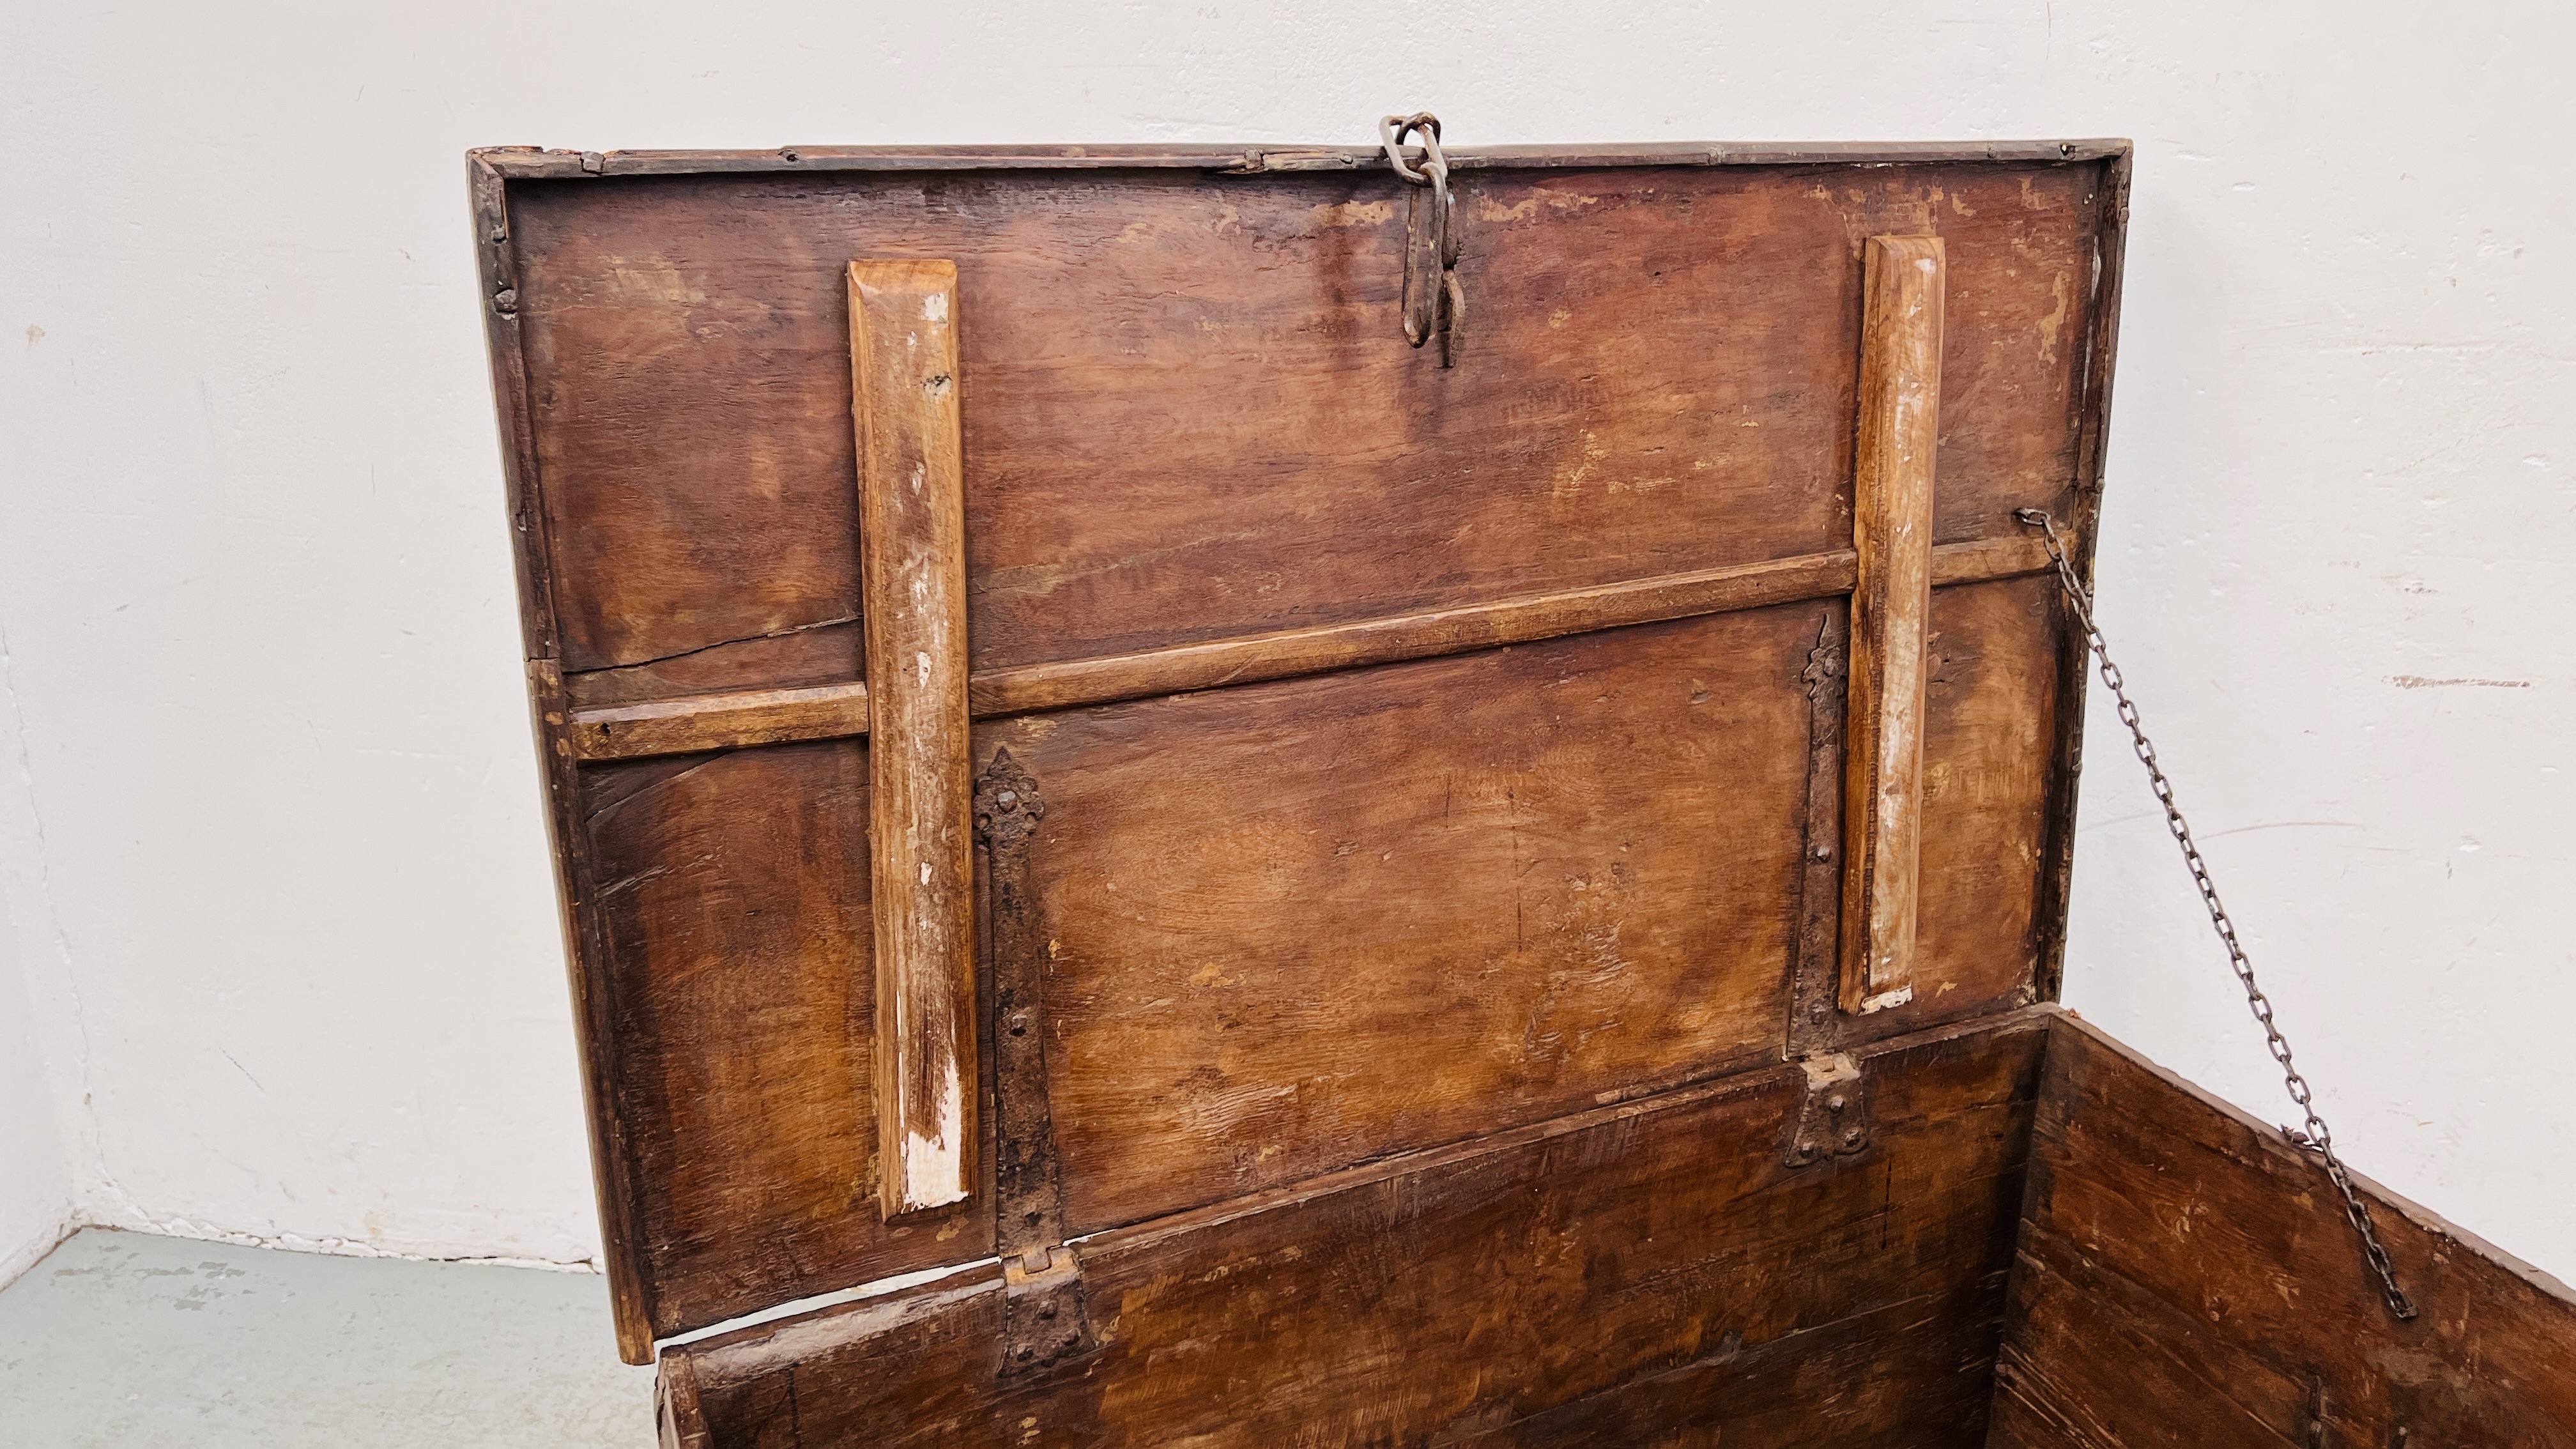 A HEAVY ANTIQUE OAK TRUNK WITH METAL BANDING WIDTH 102CM. DEPTH 61CM. HEIGHT 49CM. - Image 13 of 17